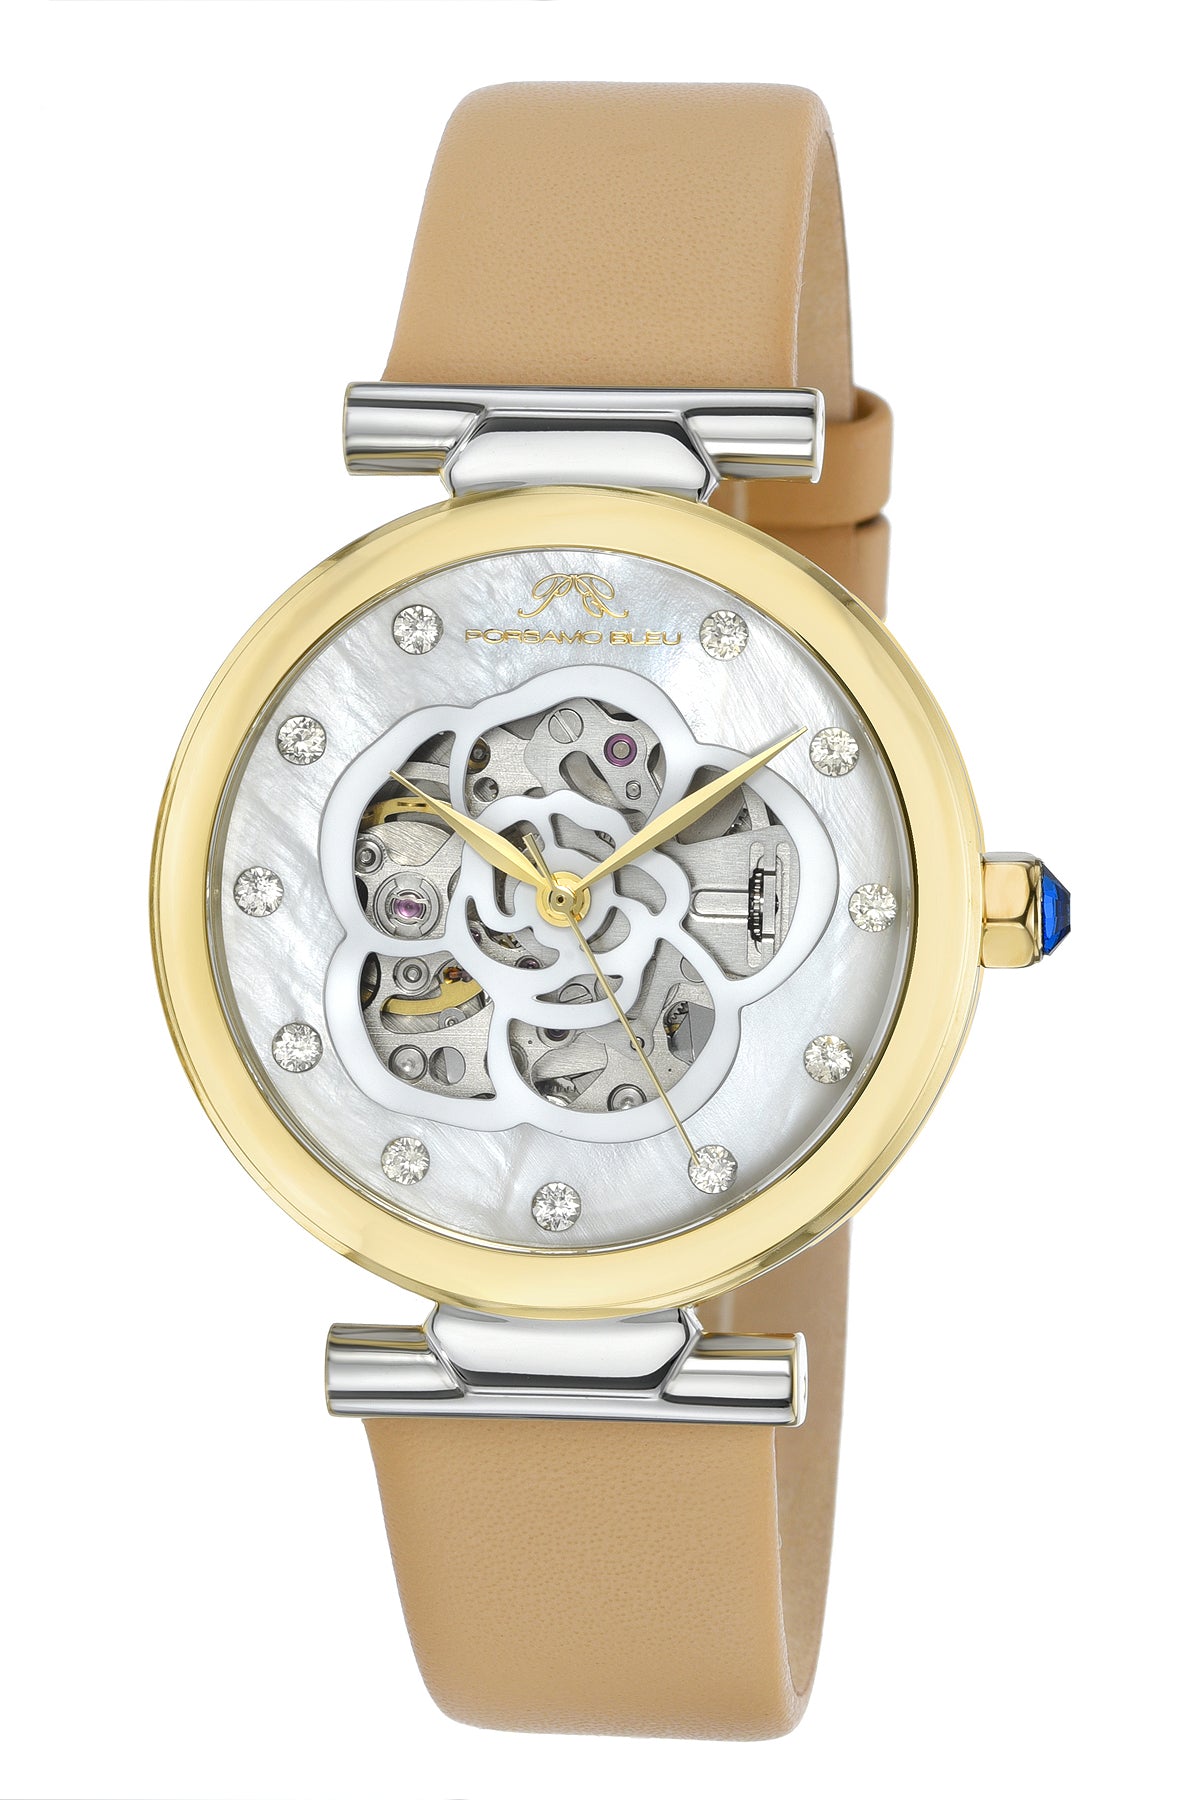 Porsamo Bleu Laura Luxury Automatic Topaz Women's Genuine Leather Band Watch, With Mother Of Pearl Skeleton Dial, Two Tone, Beige 1212CLAL